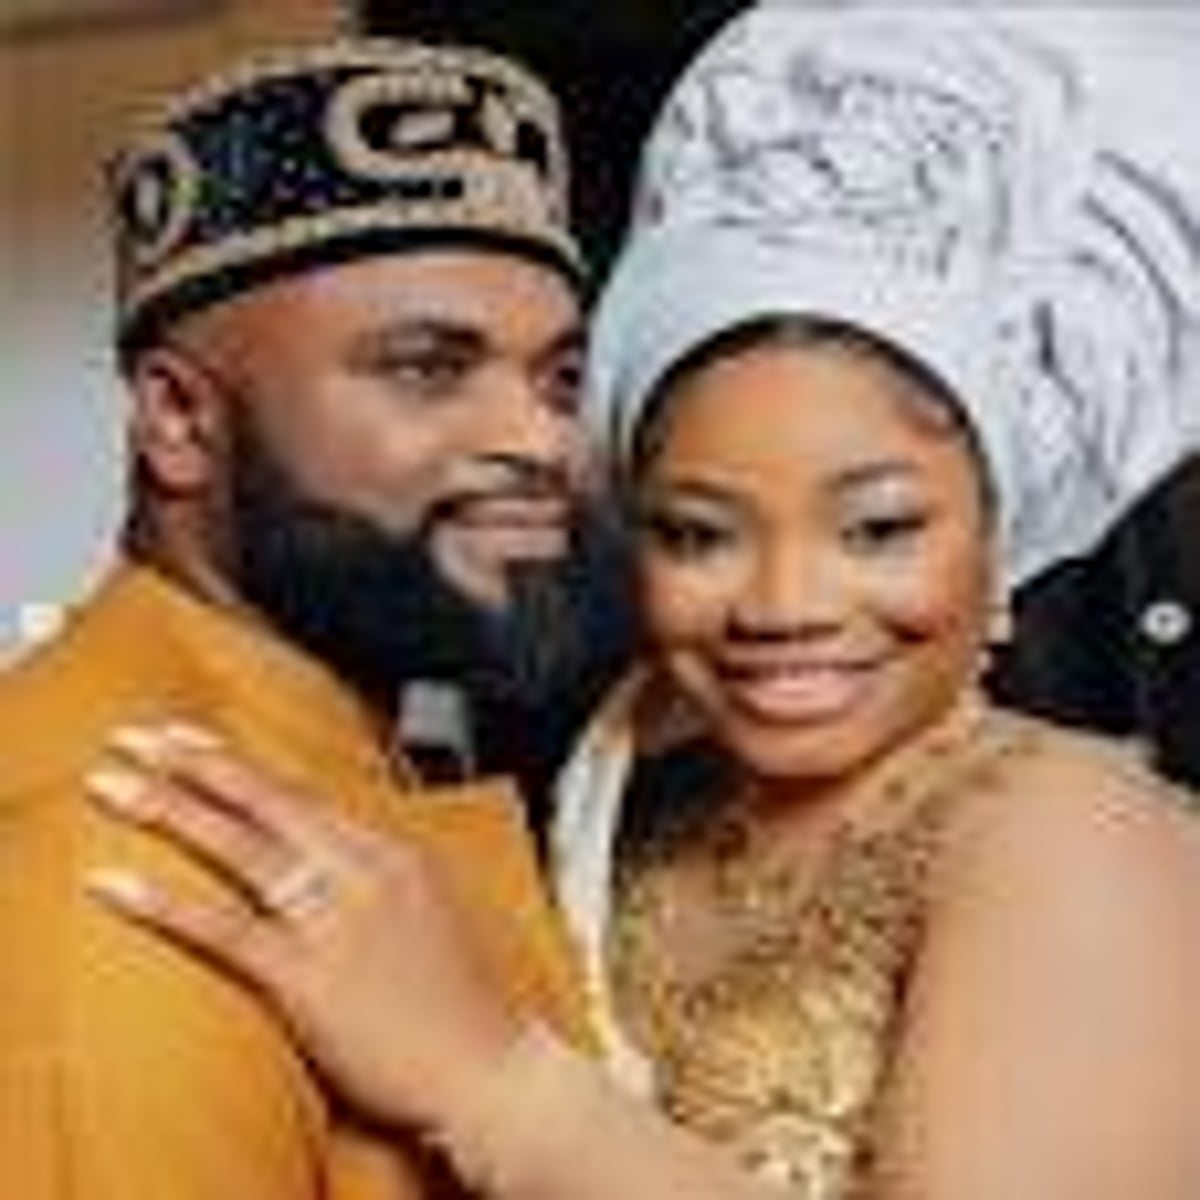 Popular Nigerian Gospel singer, Mercy Chinwo Finally Ties The Knot With Her Husband (Video)